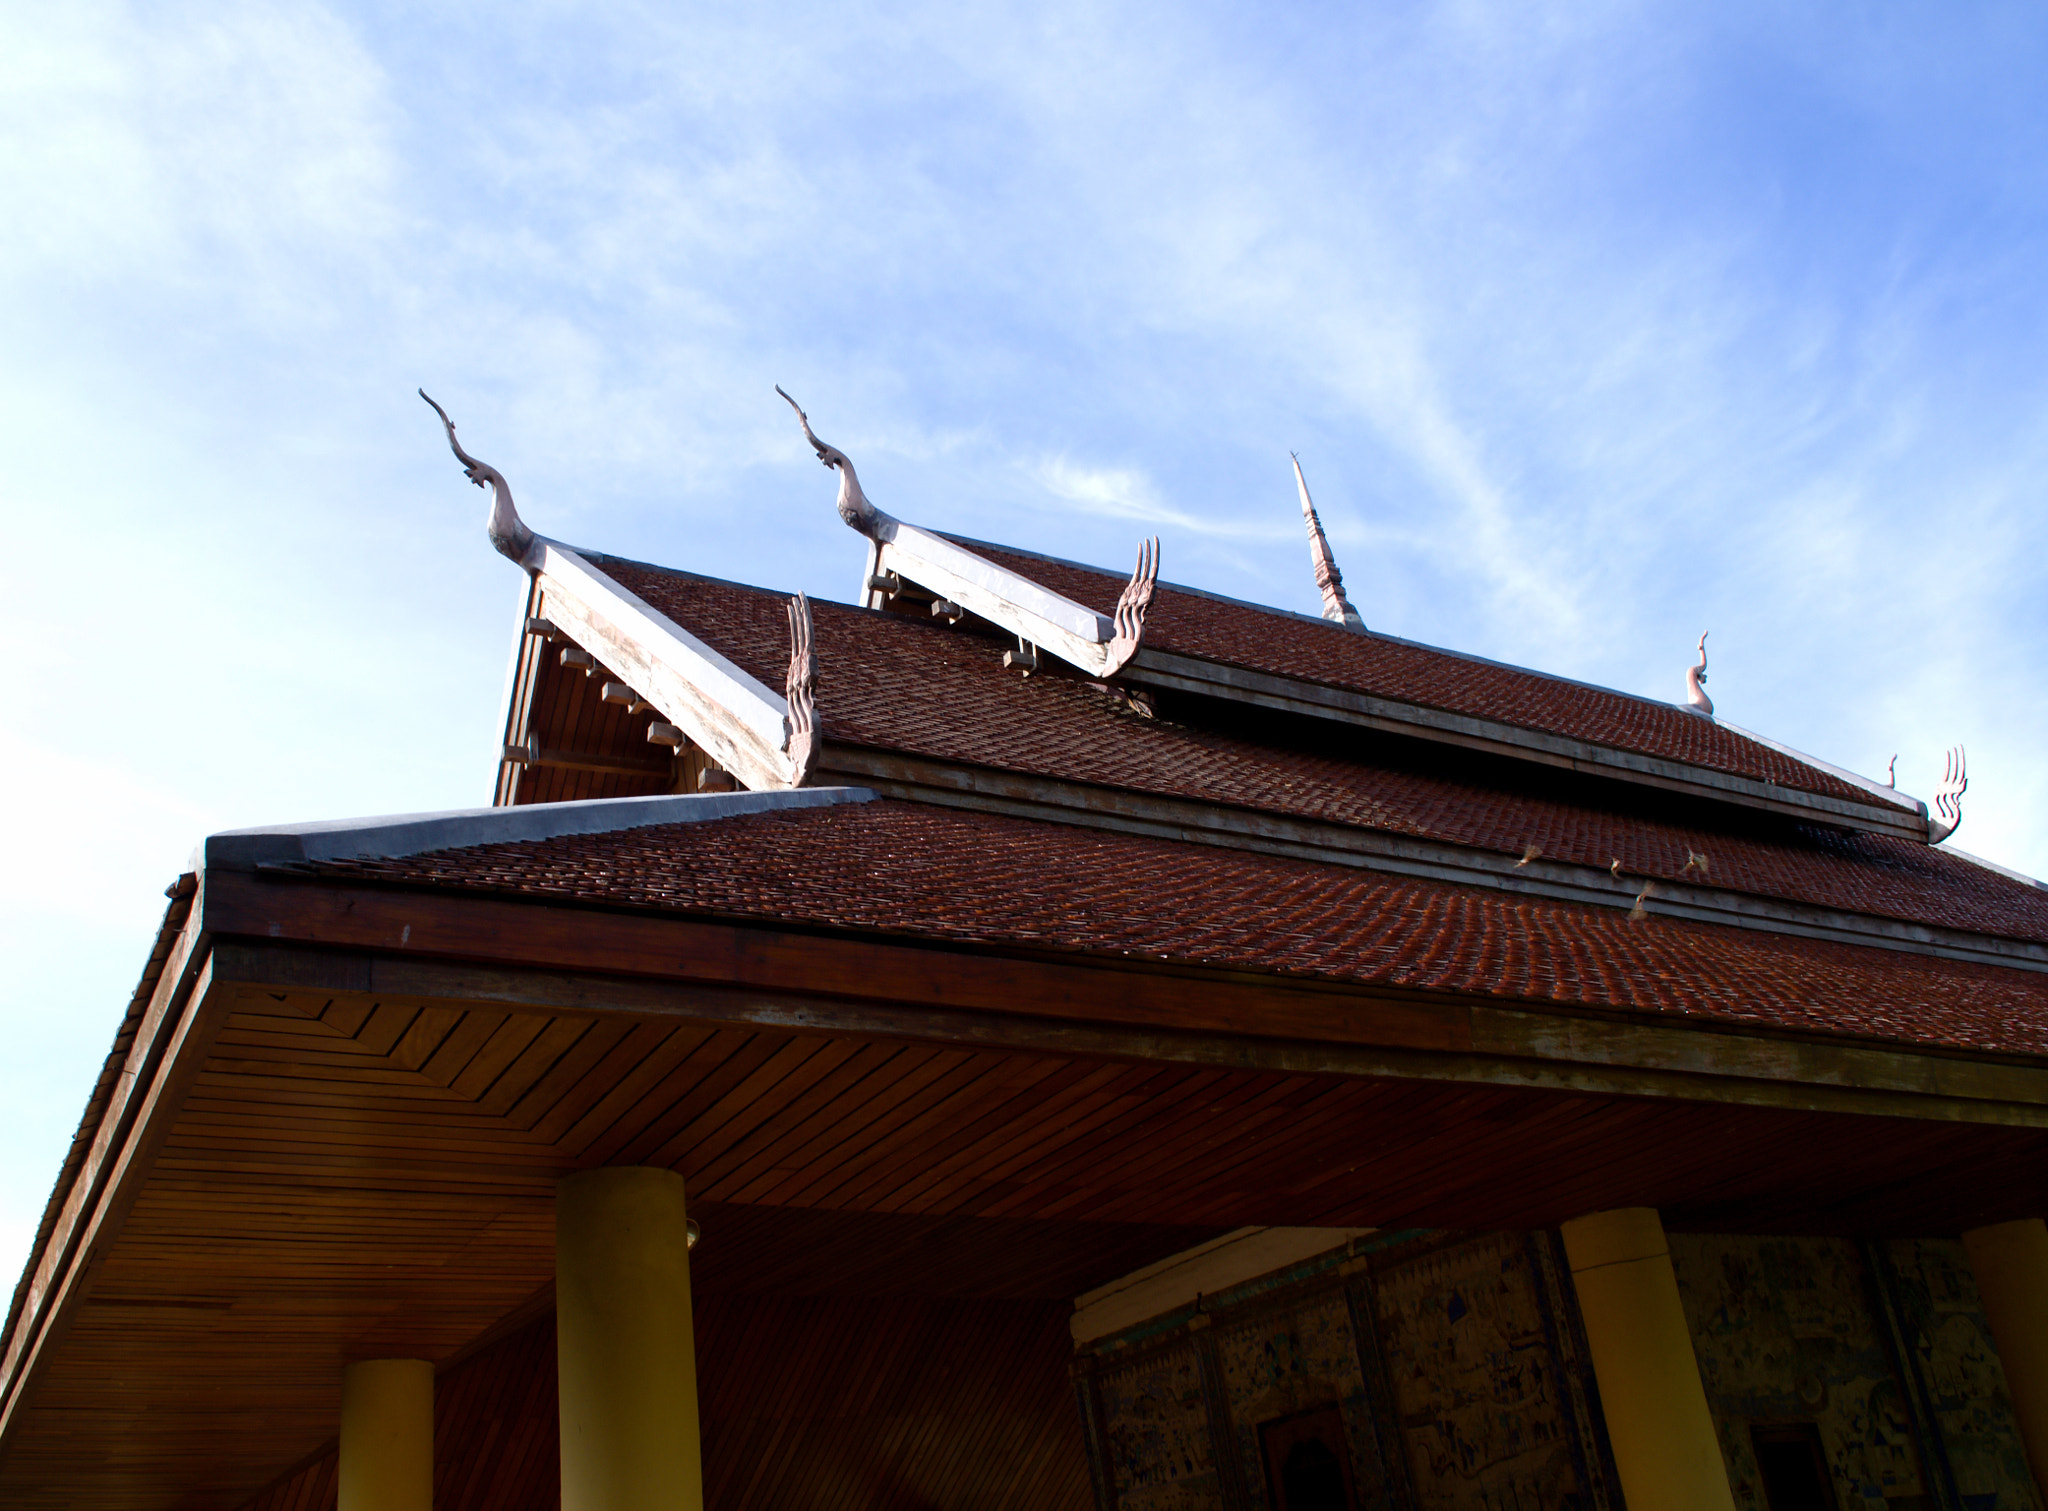 Nikon D3100 + 18.00 - 55.00 mm f/3.5 - 5.6 sample photo. Temple roof photography